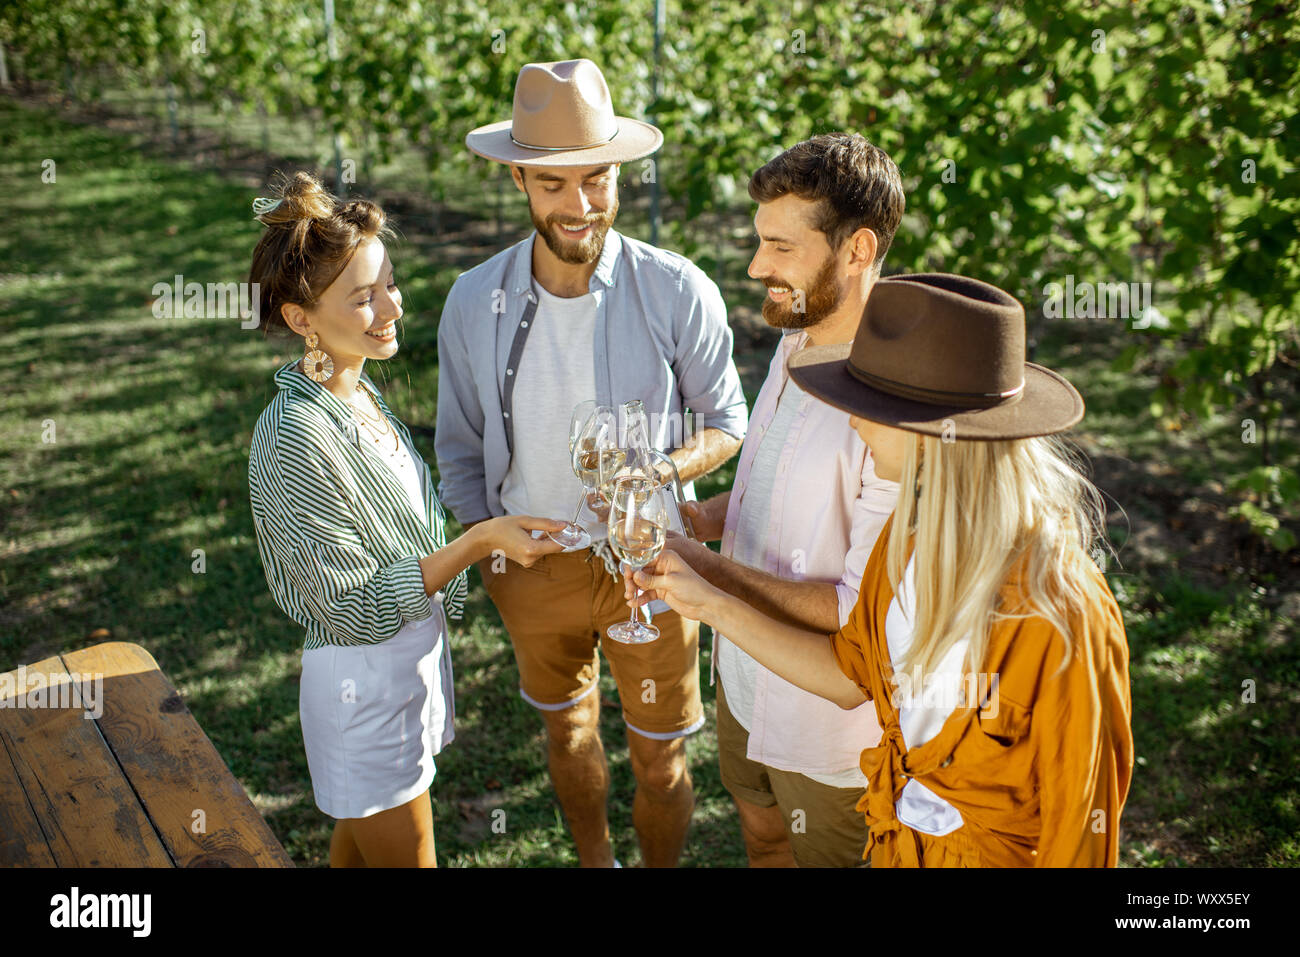 Group of young friends dressed casually having fun together, clinking wine glasses on the vineyard on a sunny summer morning Stock Photo